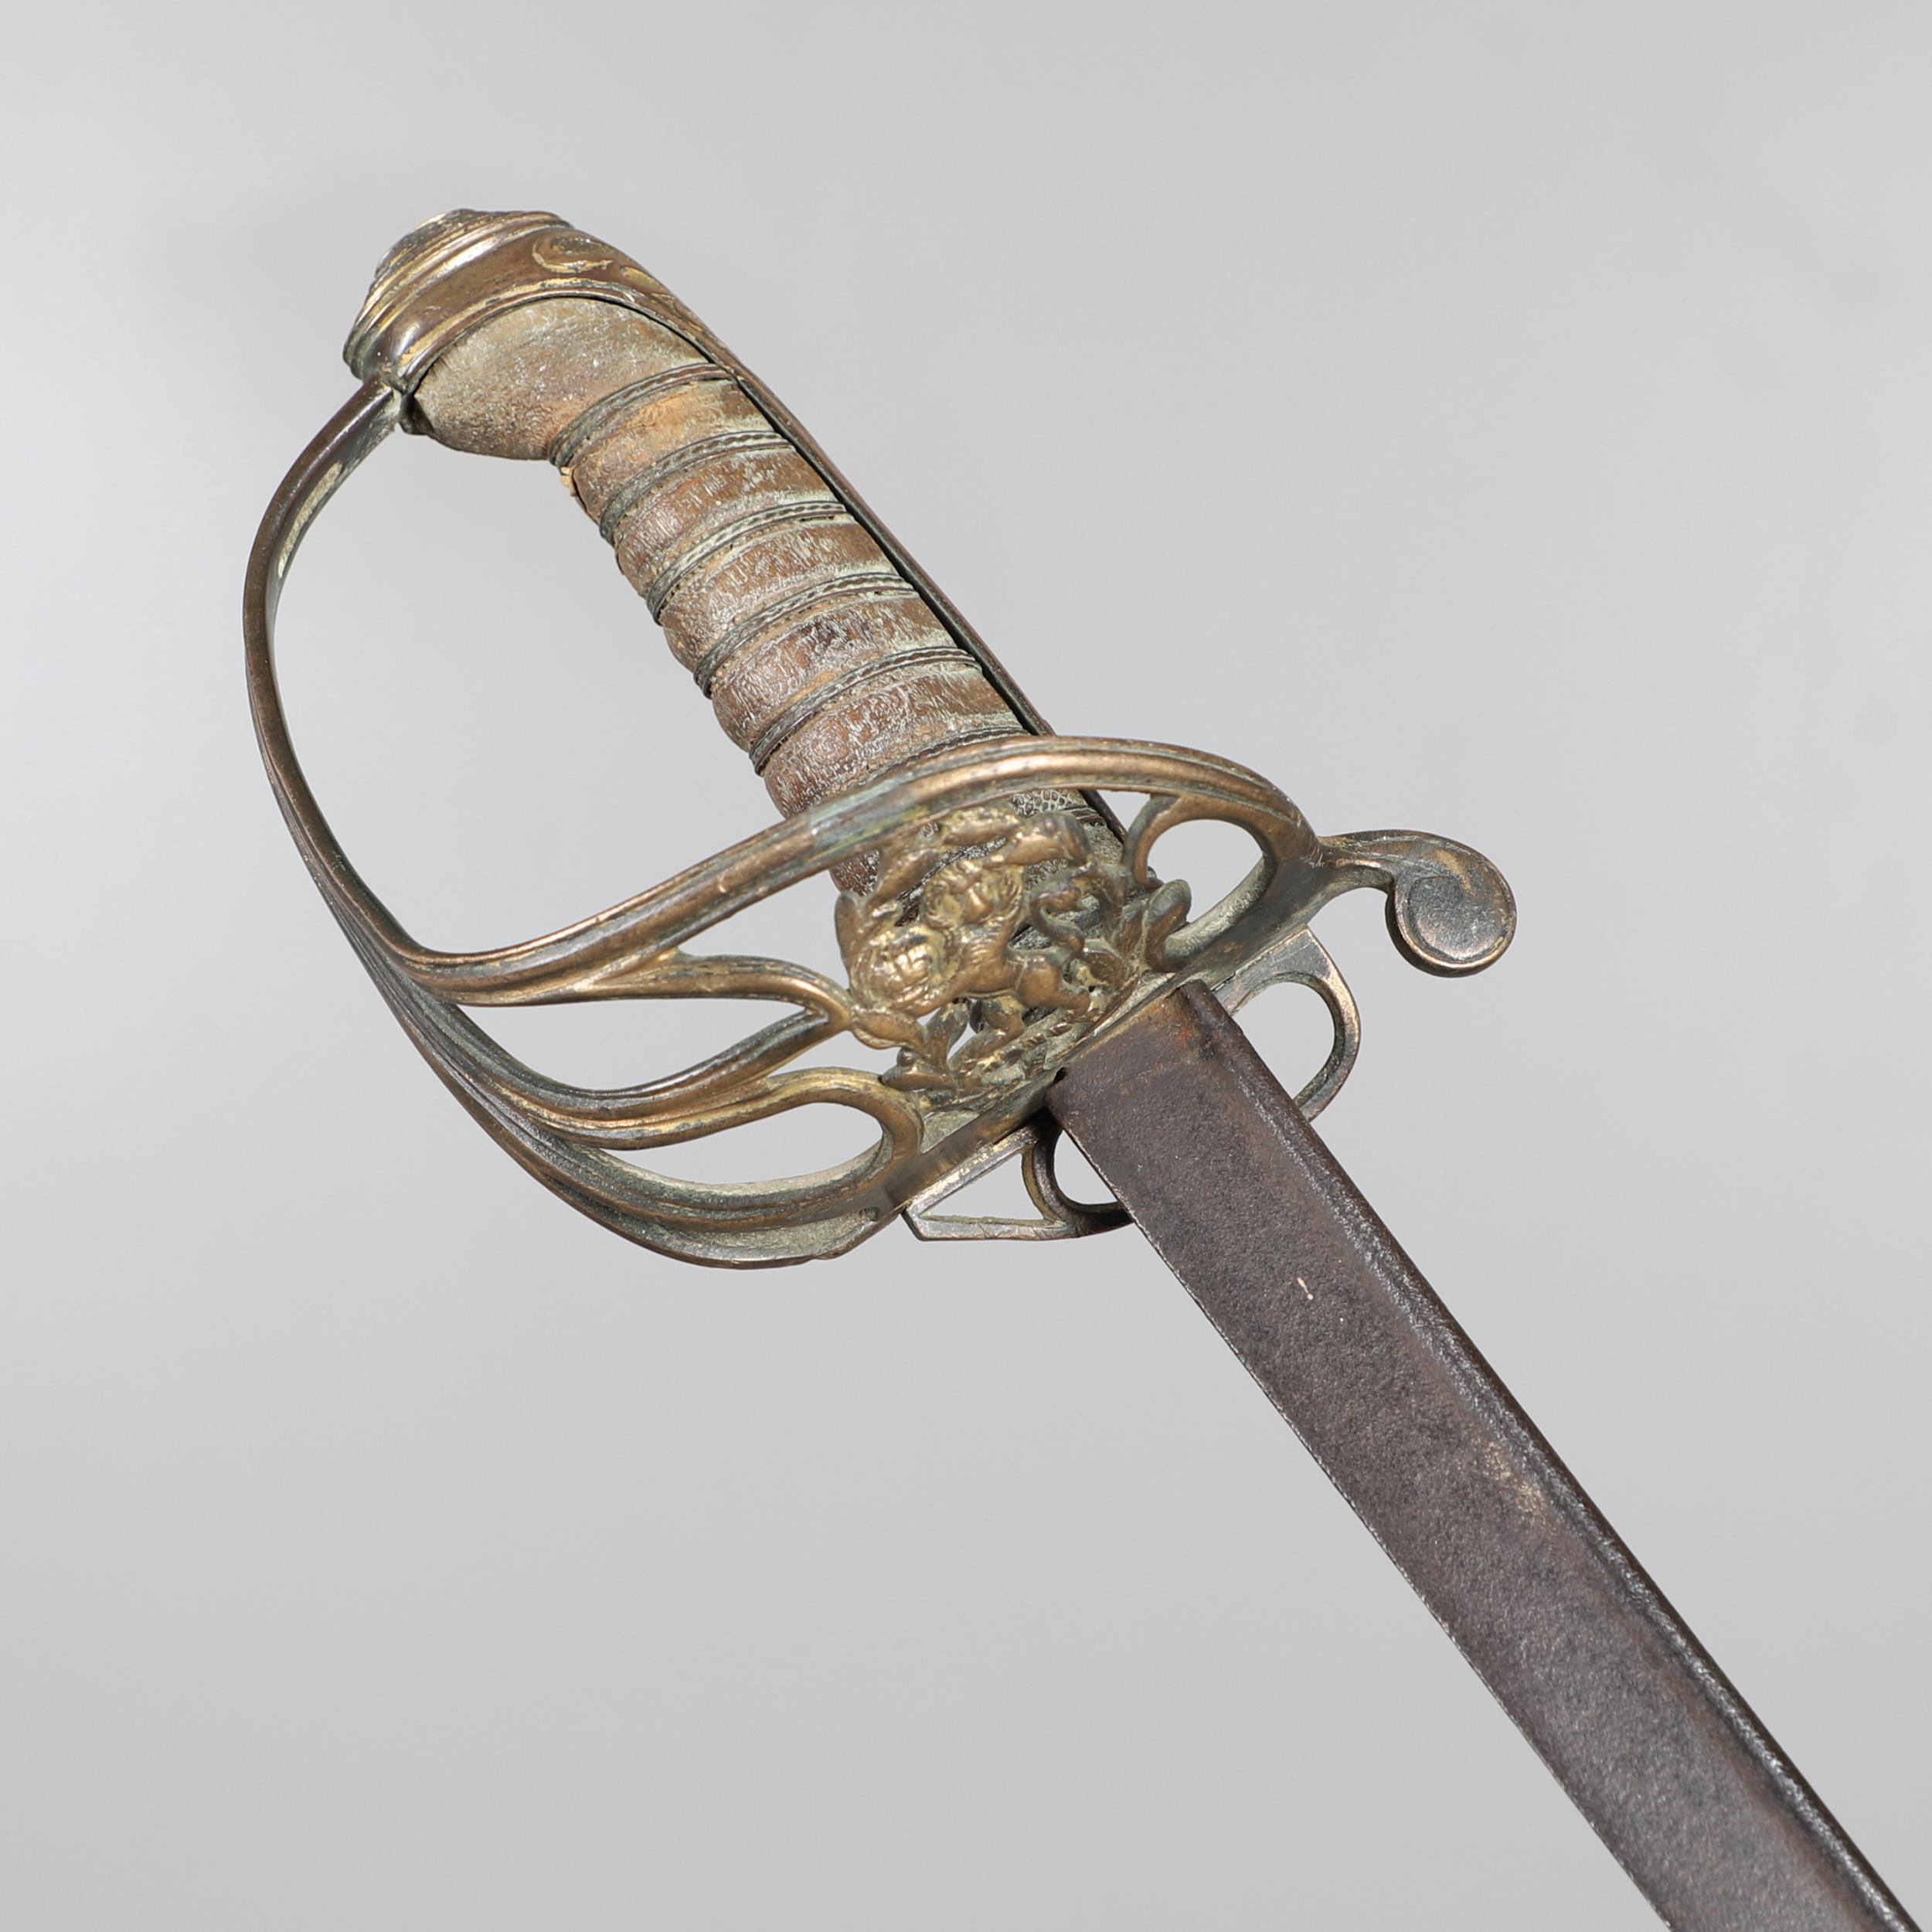 AN EAST INDIA COMPANY OFFICER'S 1822 PATTERN SWORD.